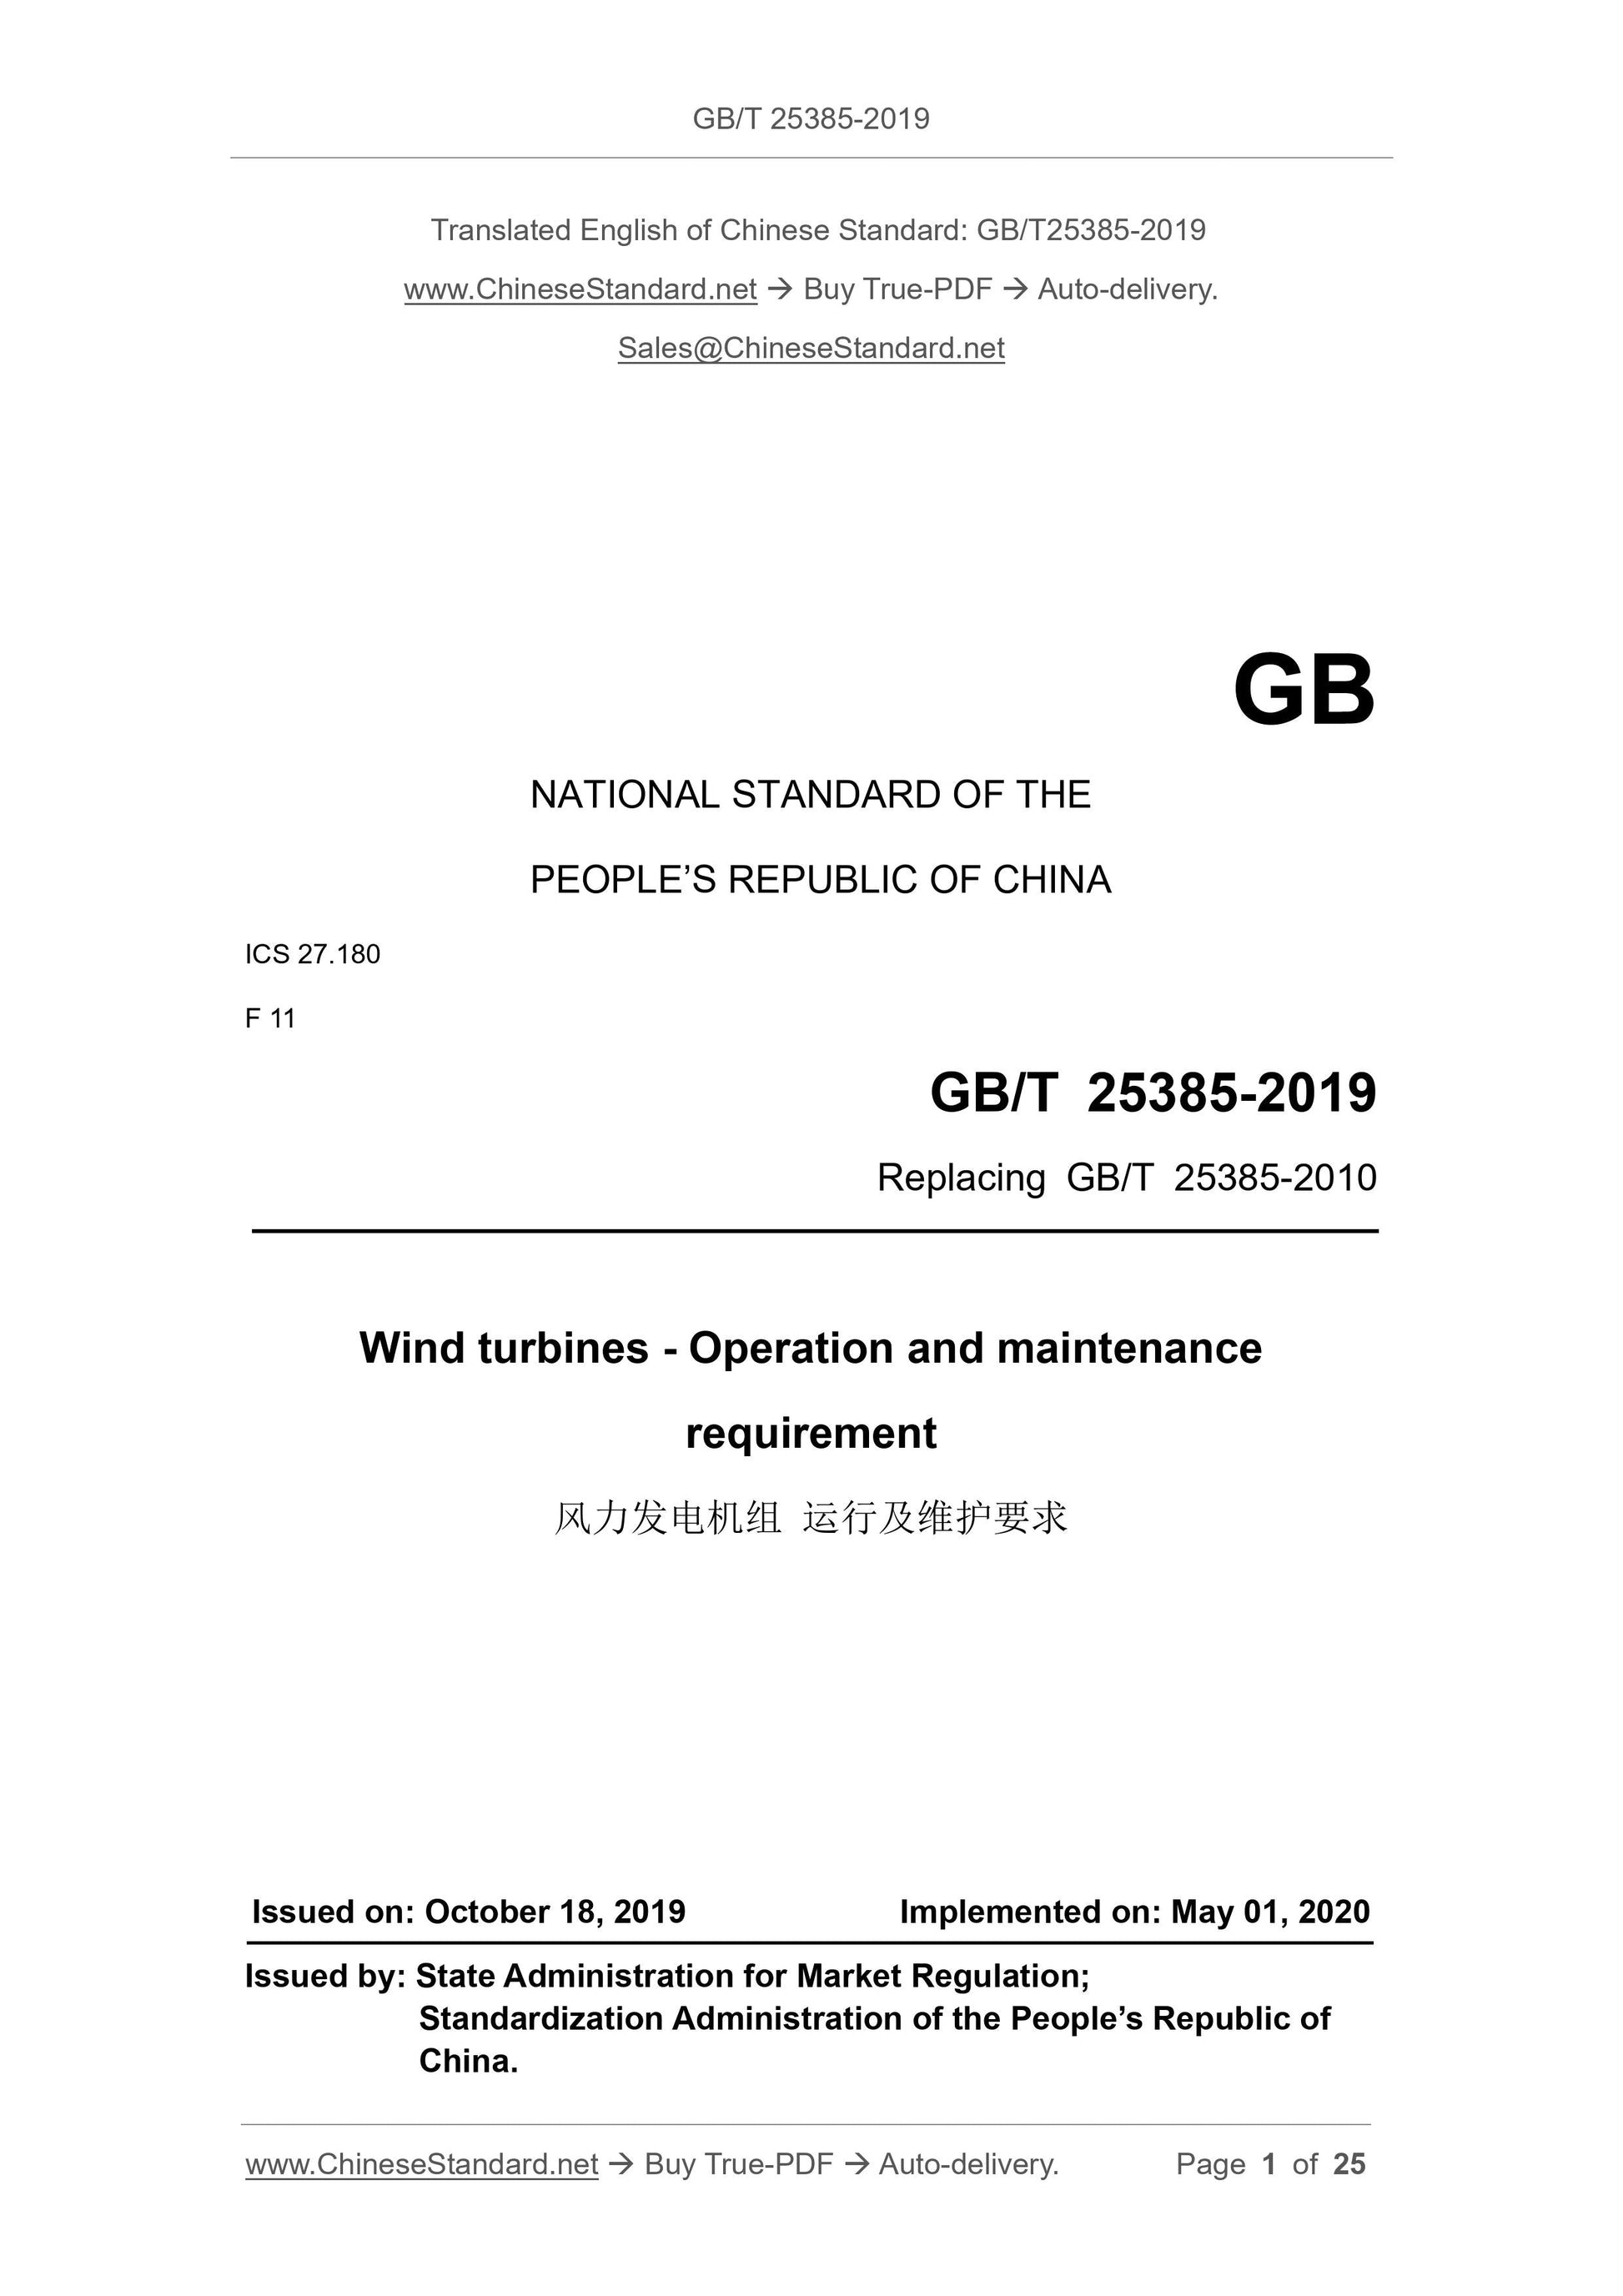 GB/T 25385-2019 Page 1